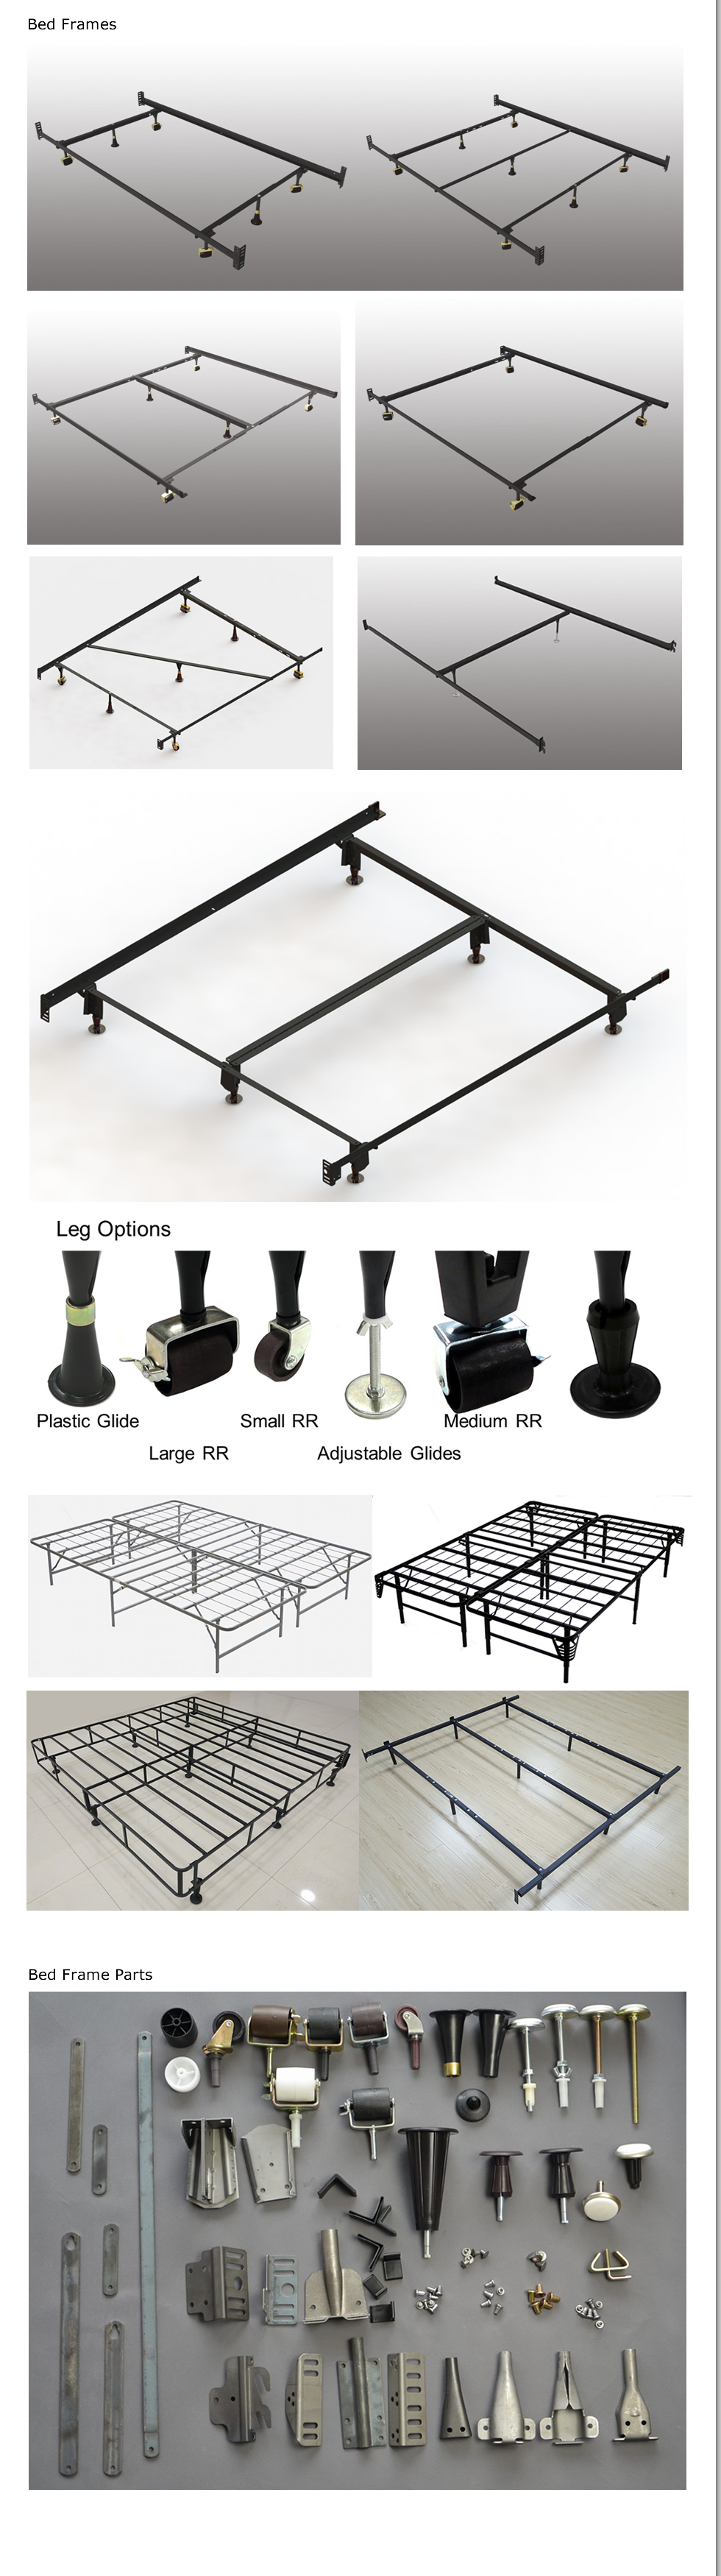 Arw Bed Frame Parts, Components Of A Bed Frame